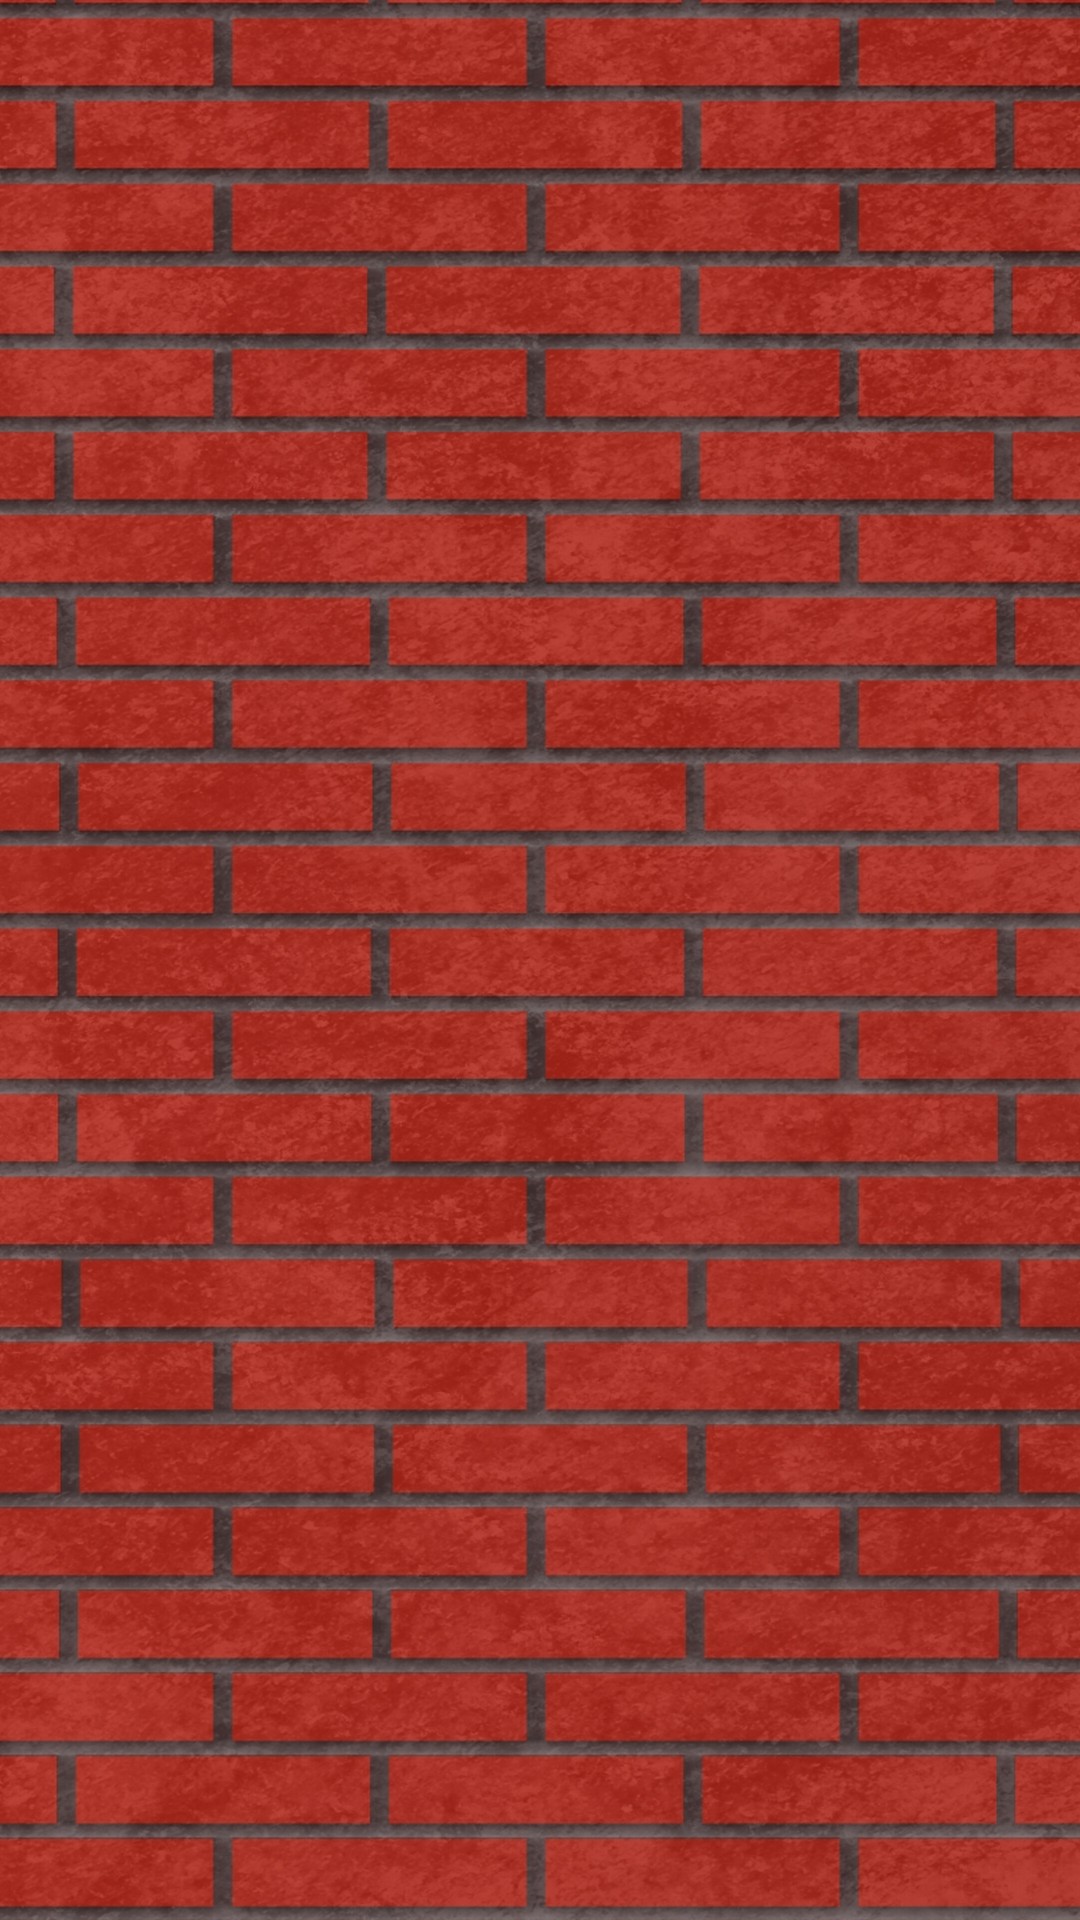 Brick i Phones Wallpaper with high-resolution 1080x1920 pixel. Download all Mobile Wallpapers and Use them as wallpapers for your iPhone, Tablet, iPad, Android and other mobile devices